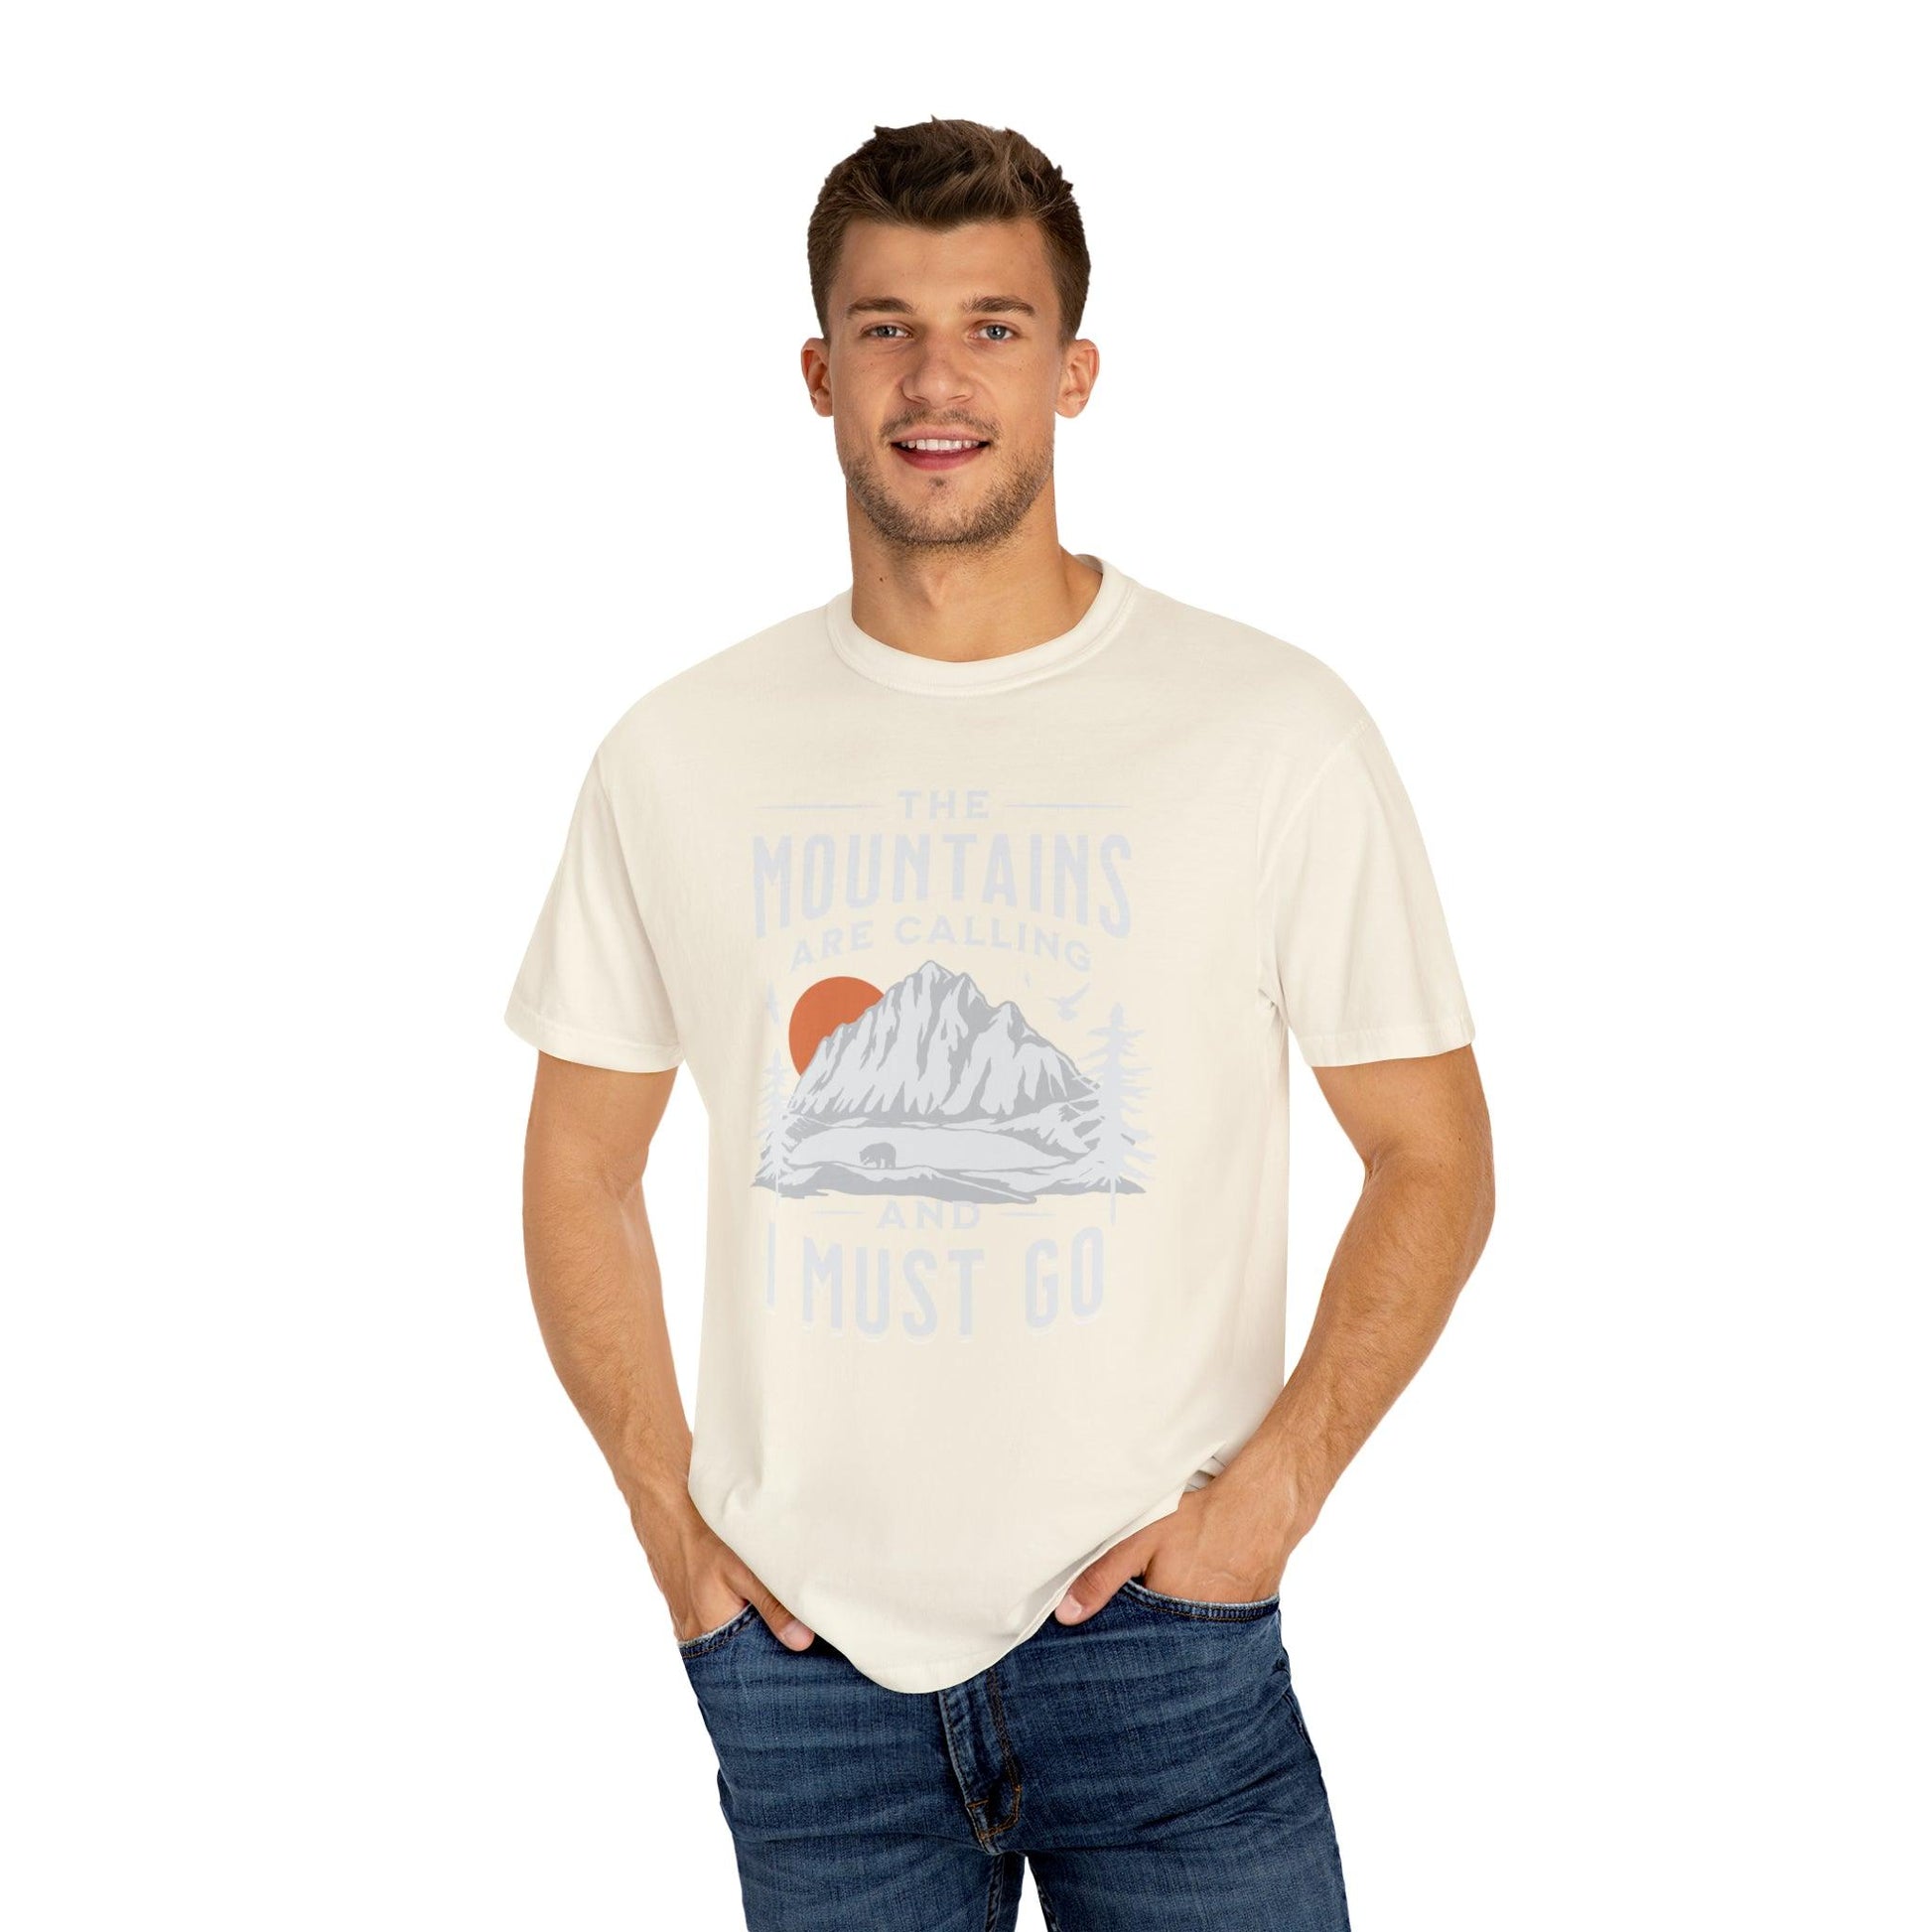 The Mountainous Wanderer: Answering the Call with Style T-Shirt - Pandaize